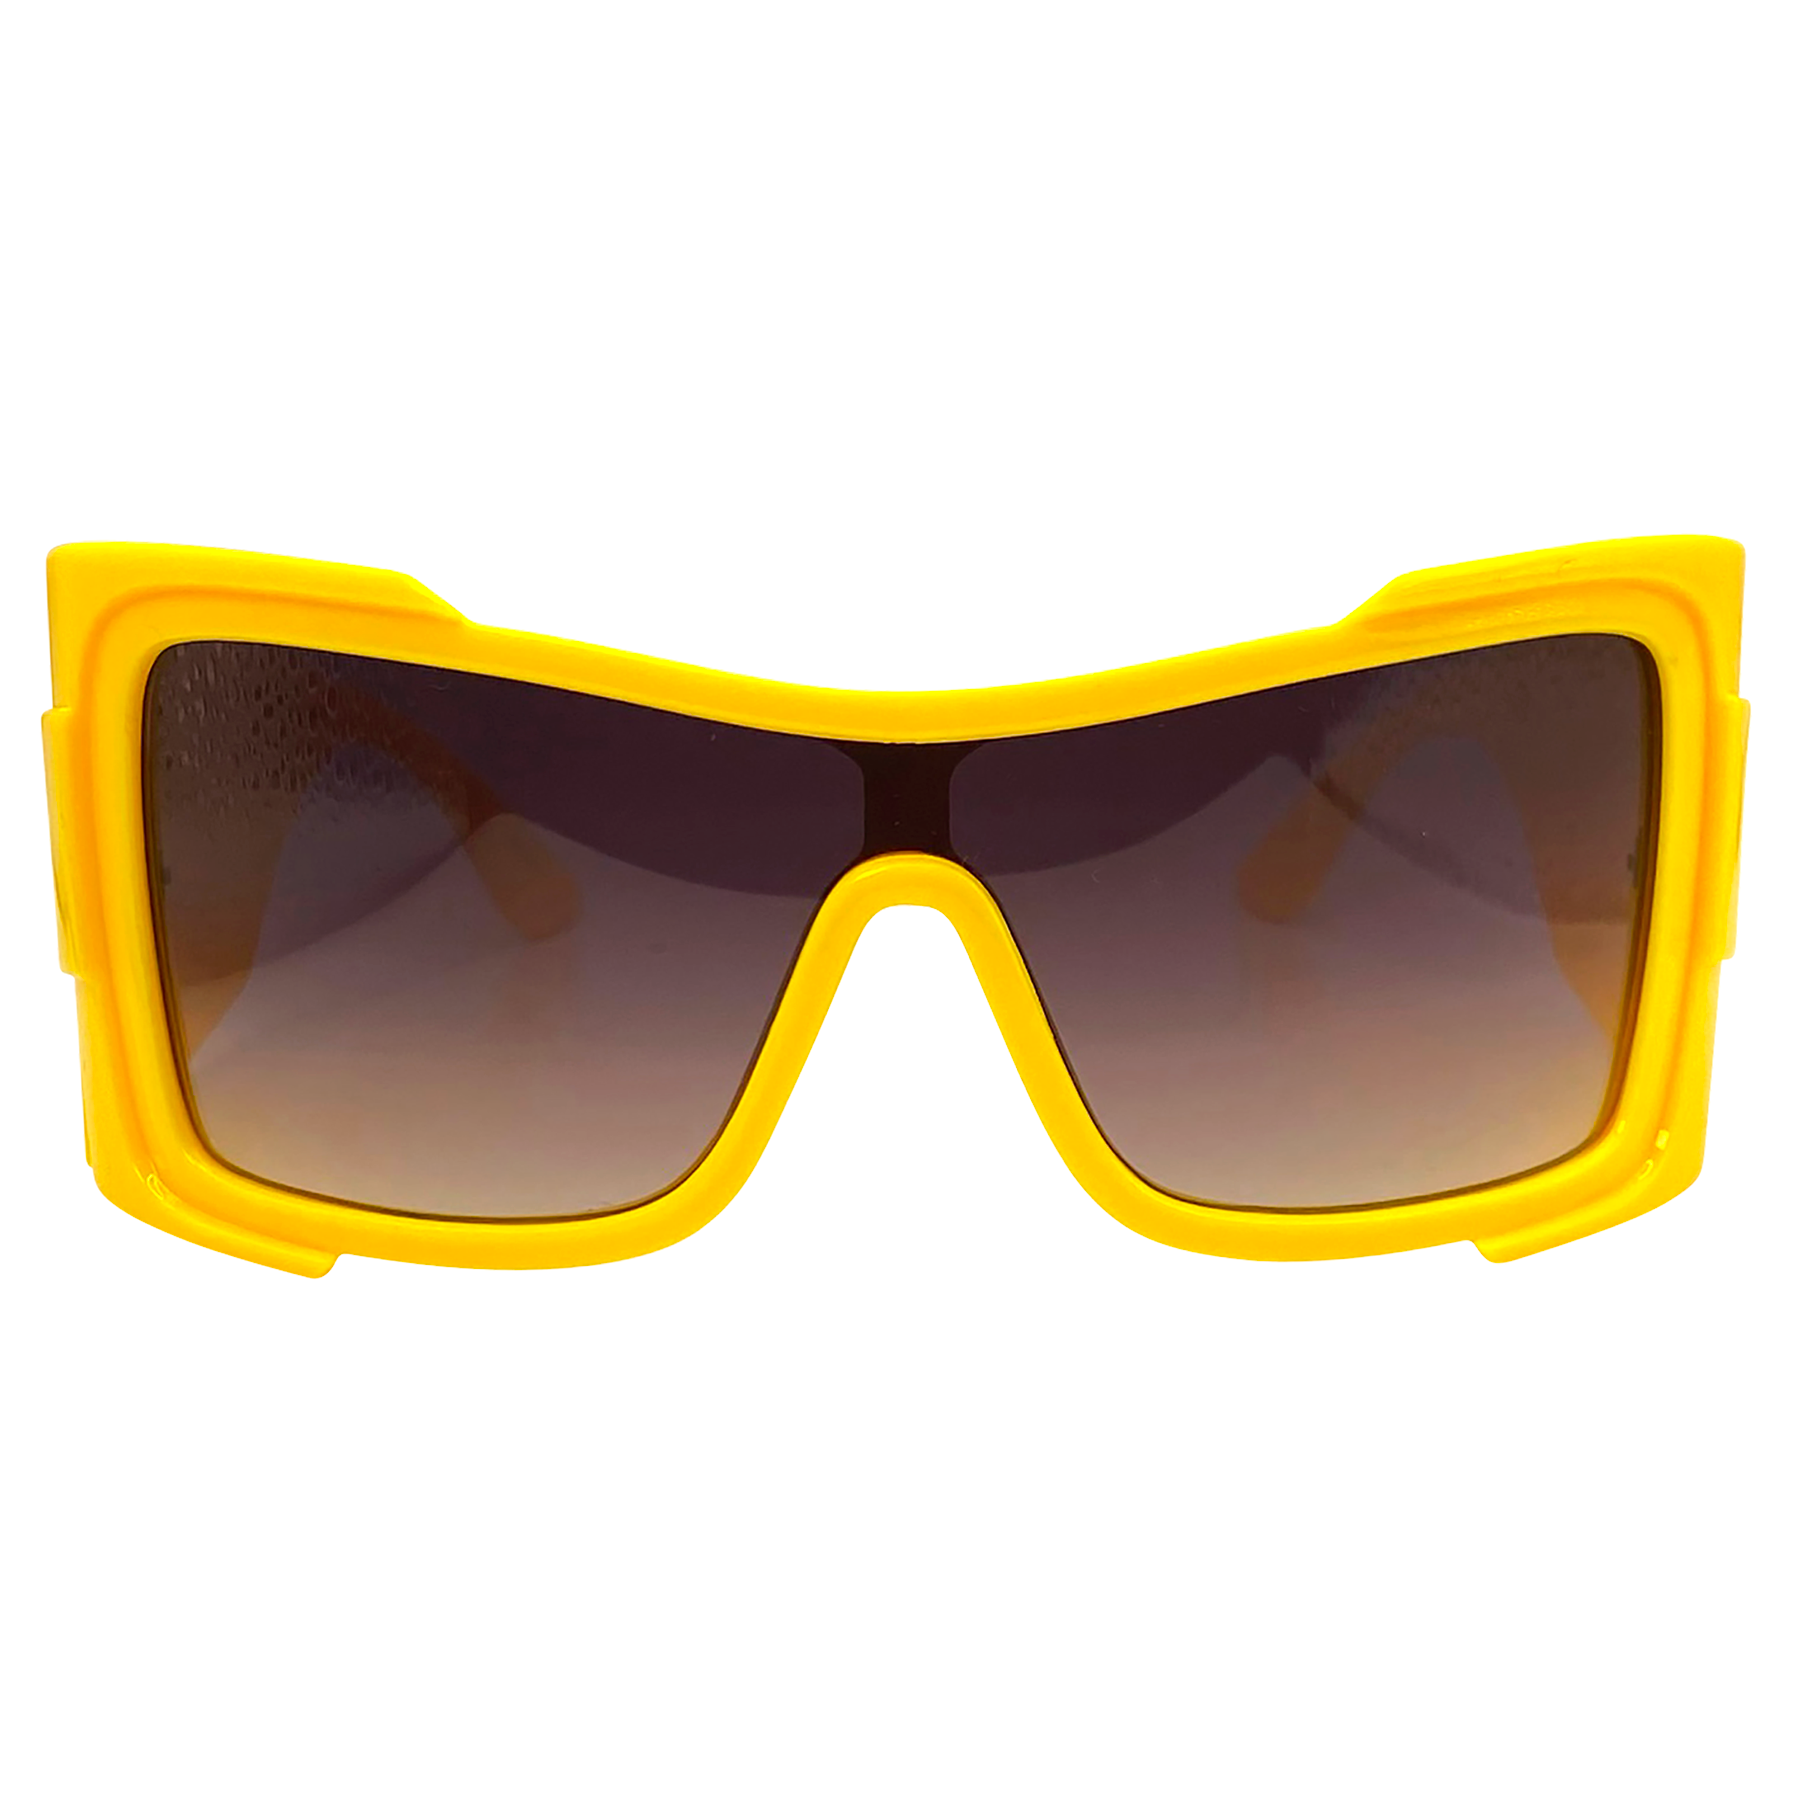 marigold yellow sunglasses with a smoke lens and a oversized square style frame